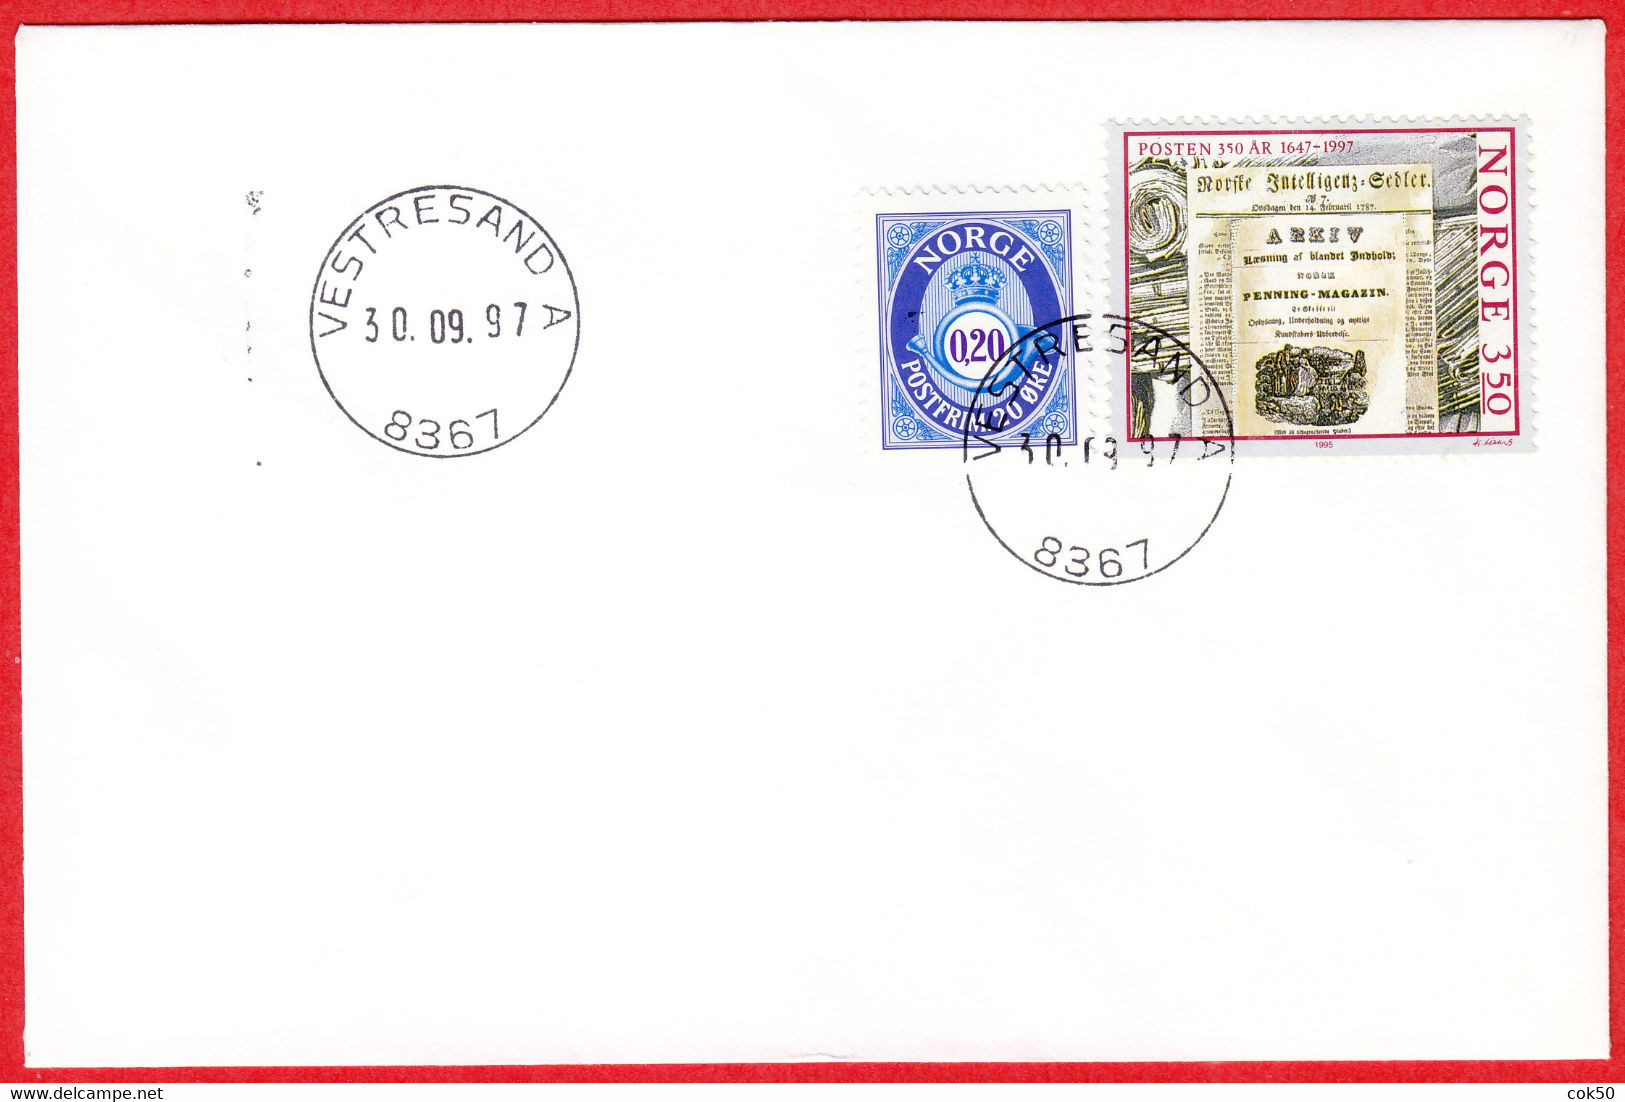 NORWAY -  8367 VESTRESAND A - 24 MmØ - (Nordland County) - Last Day/postoffice Closed On 1997.09.30 - Lokale Uitgaven